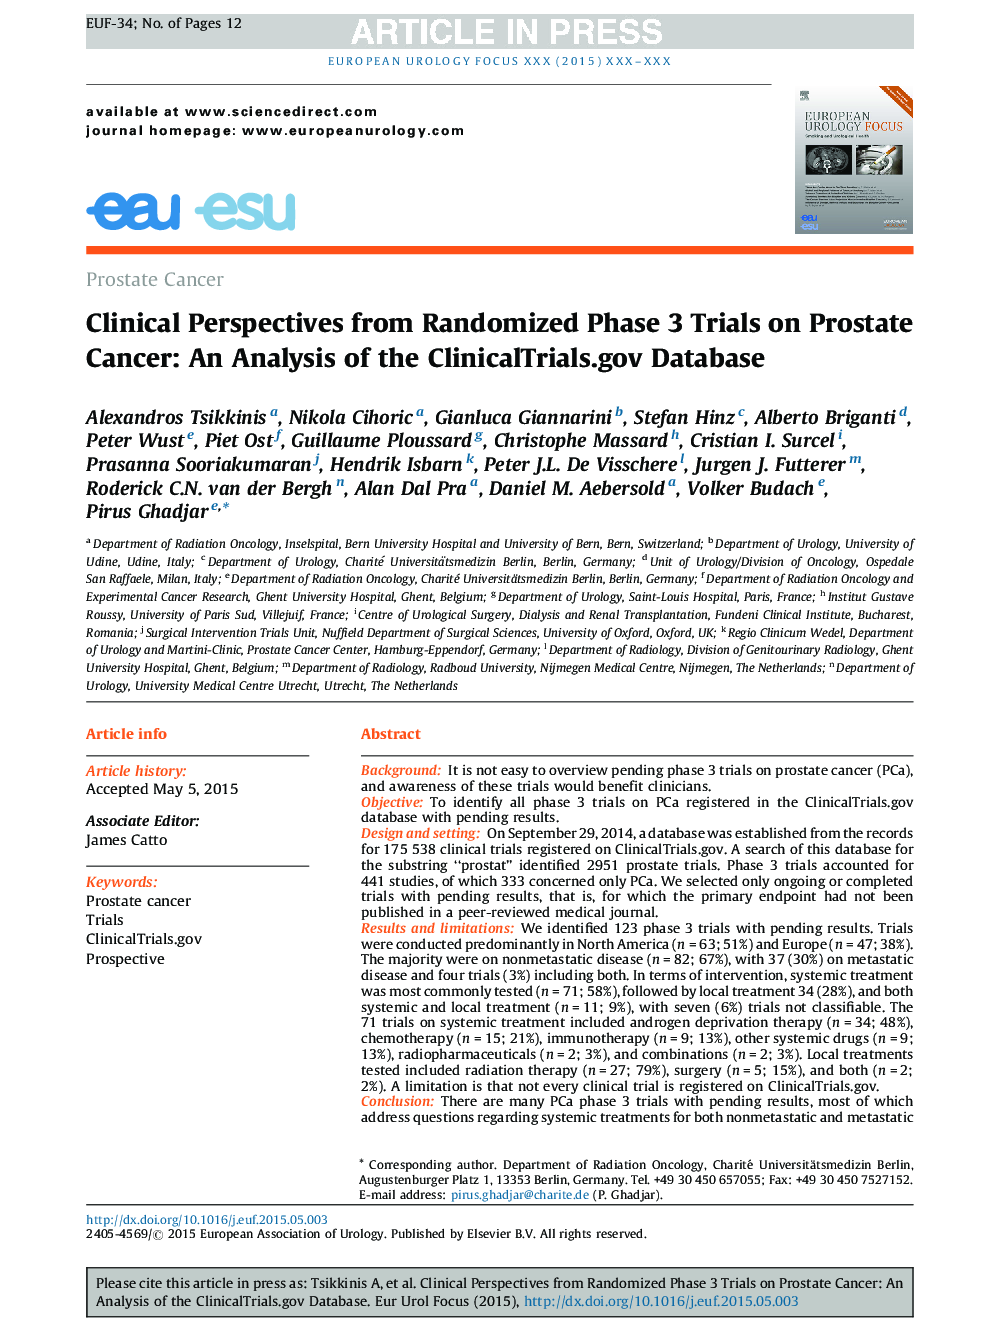 Clinical Perspectives from Randomized Phase 3 Trials on Prostate Cancer: An Analysis of the ClinicalTrials.gov Database